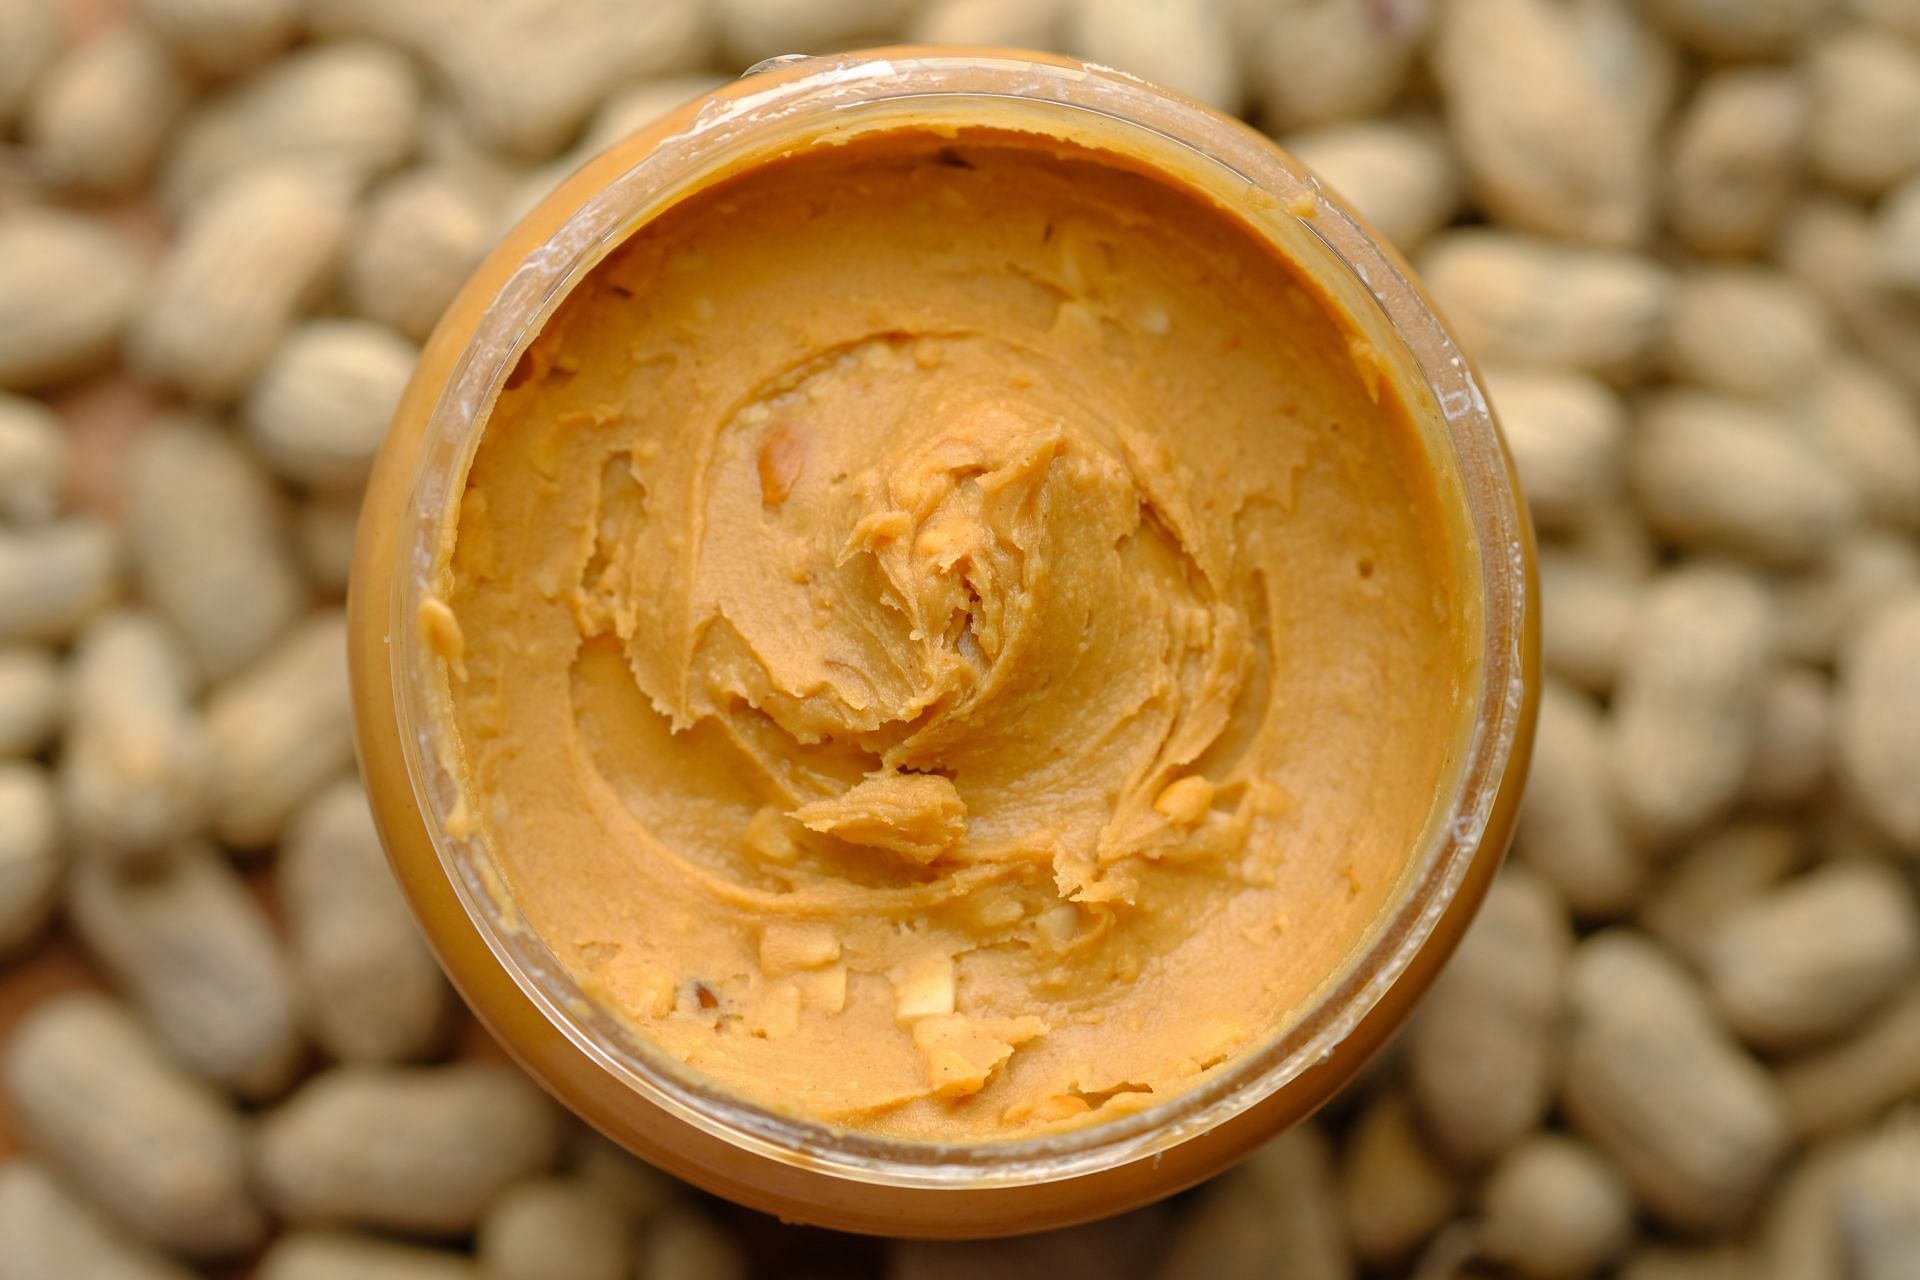 If consumed in moderation peanut butter can provide various health benefits. (Image via Unsplash / Towfiqu Barbhuiya)